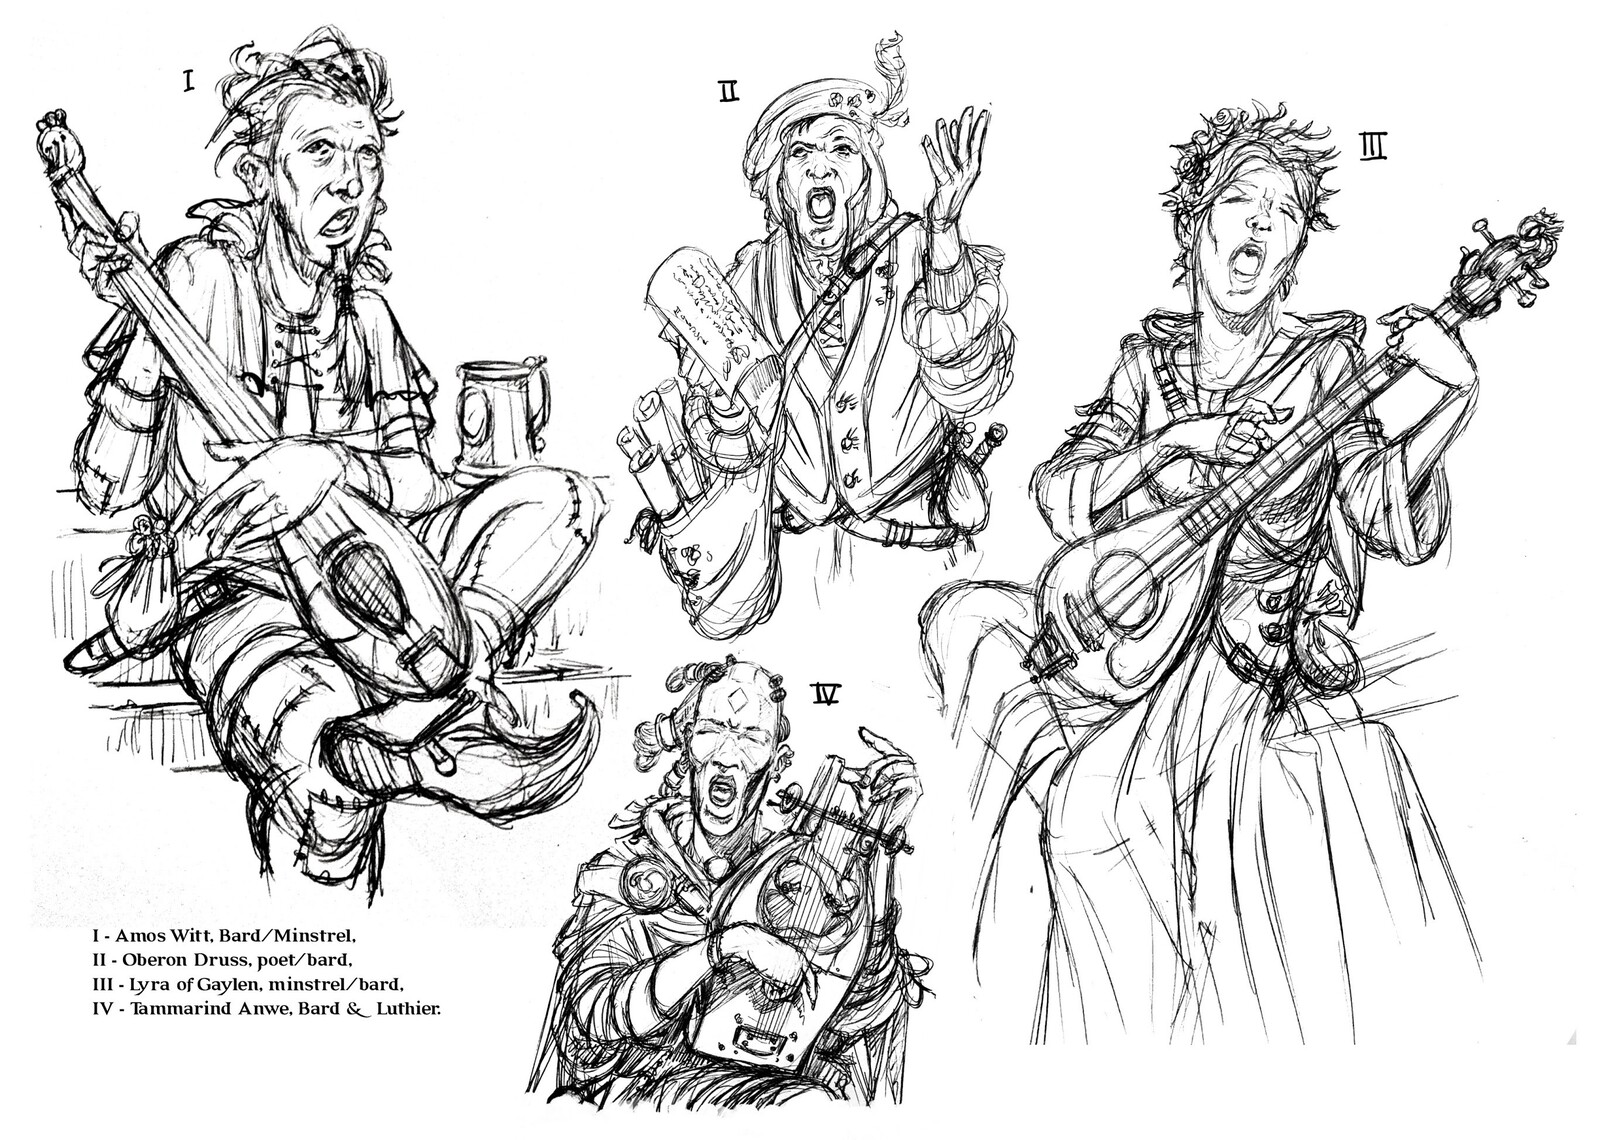 Minstrels and Bards